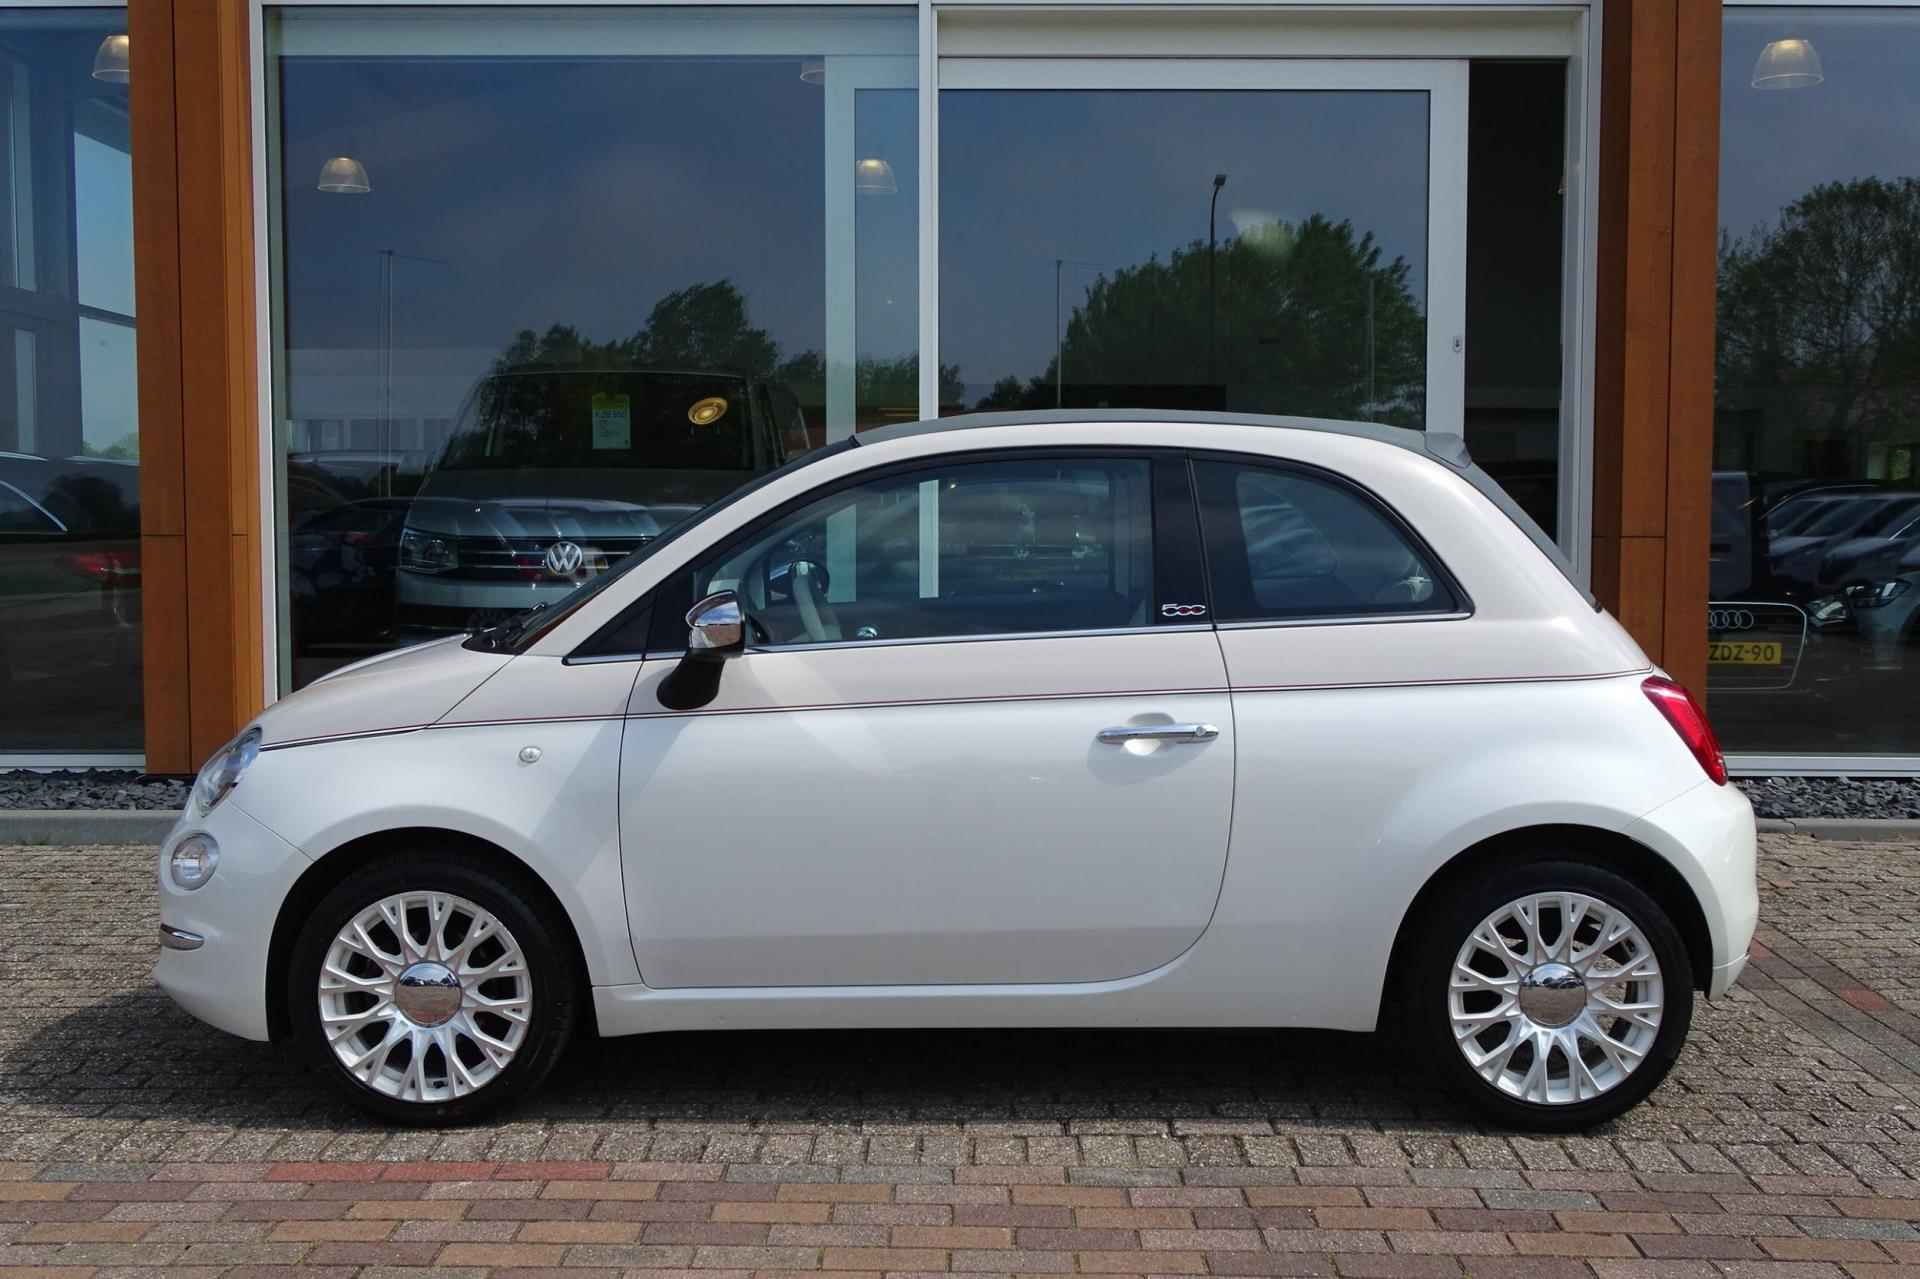 Fiat 500 C 0.9 TwinAir Turbo Forever Young - 3/41